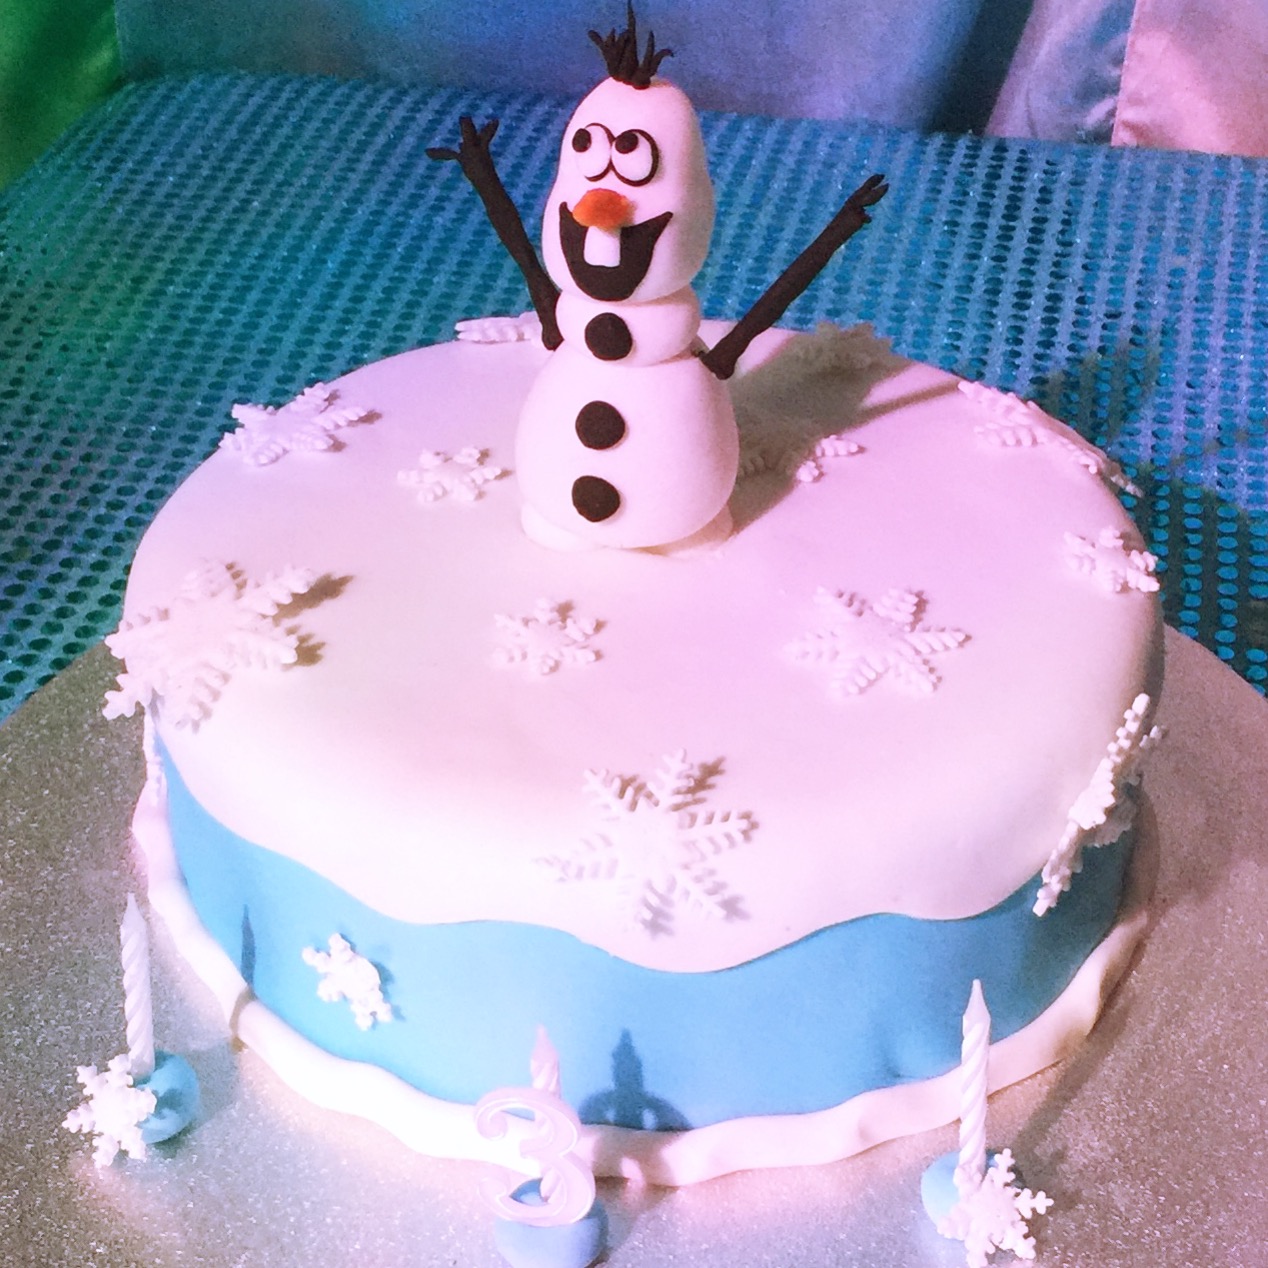 Olaf cake - The Great British Bake Off | The Great British Bake Off